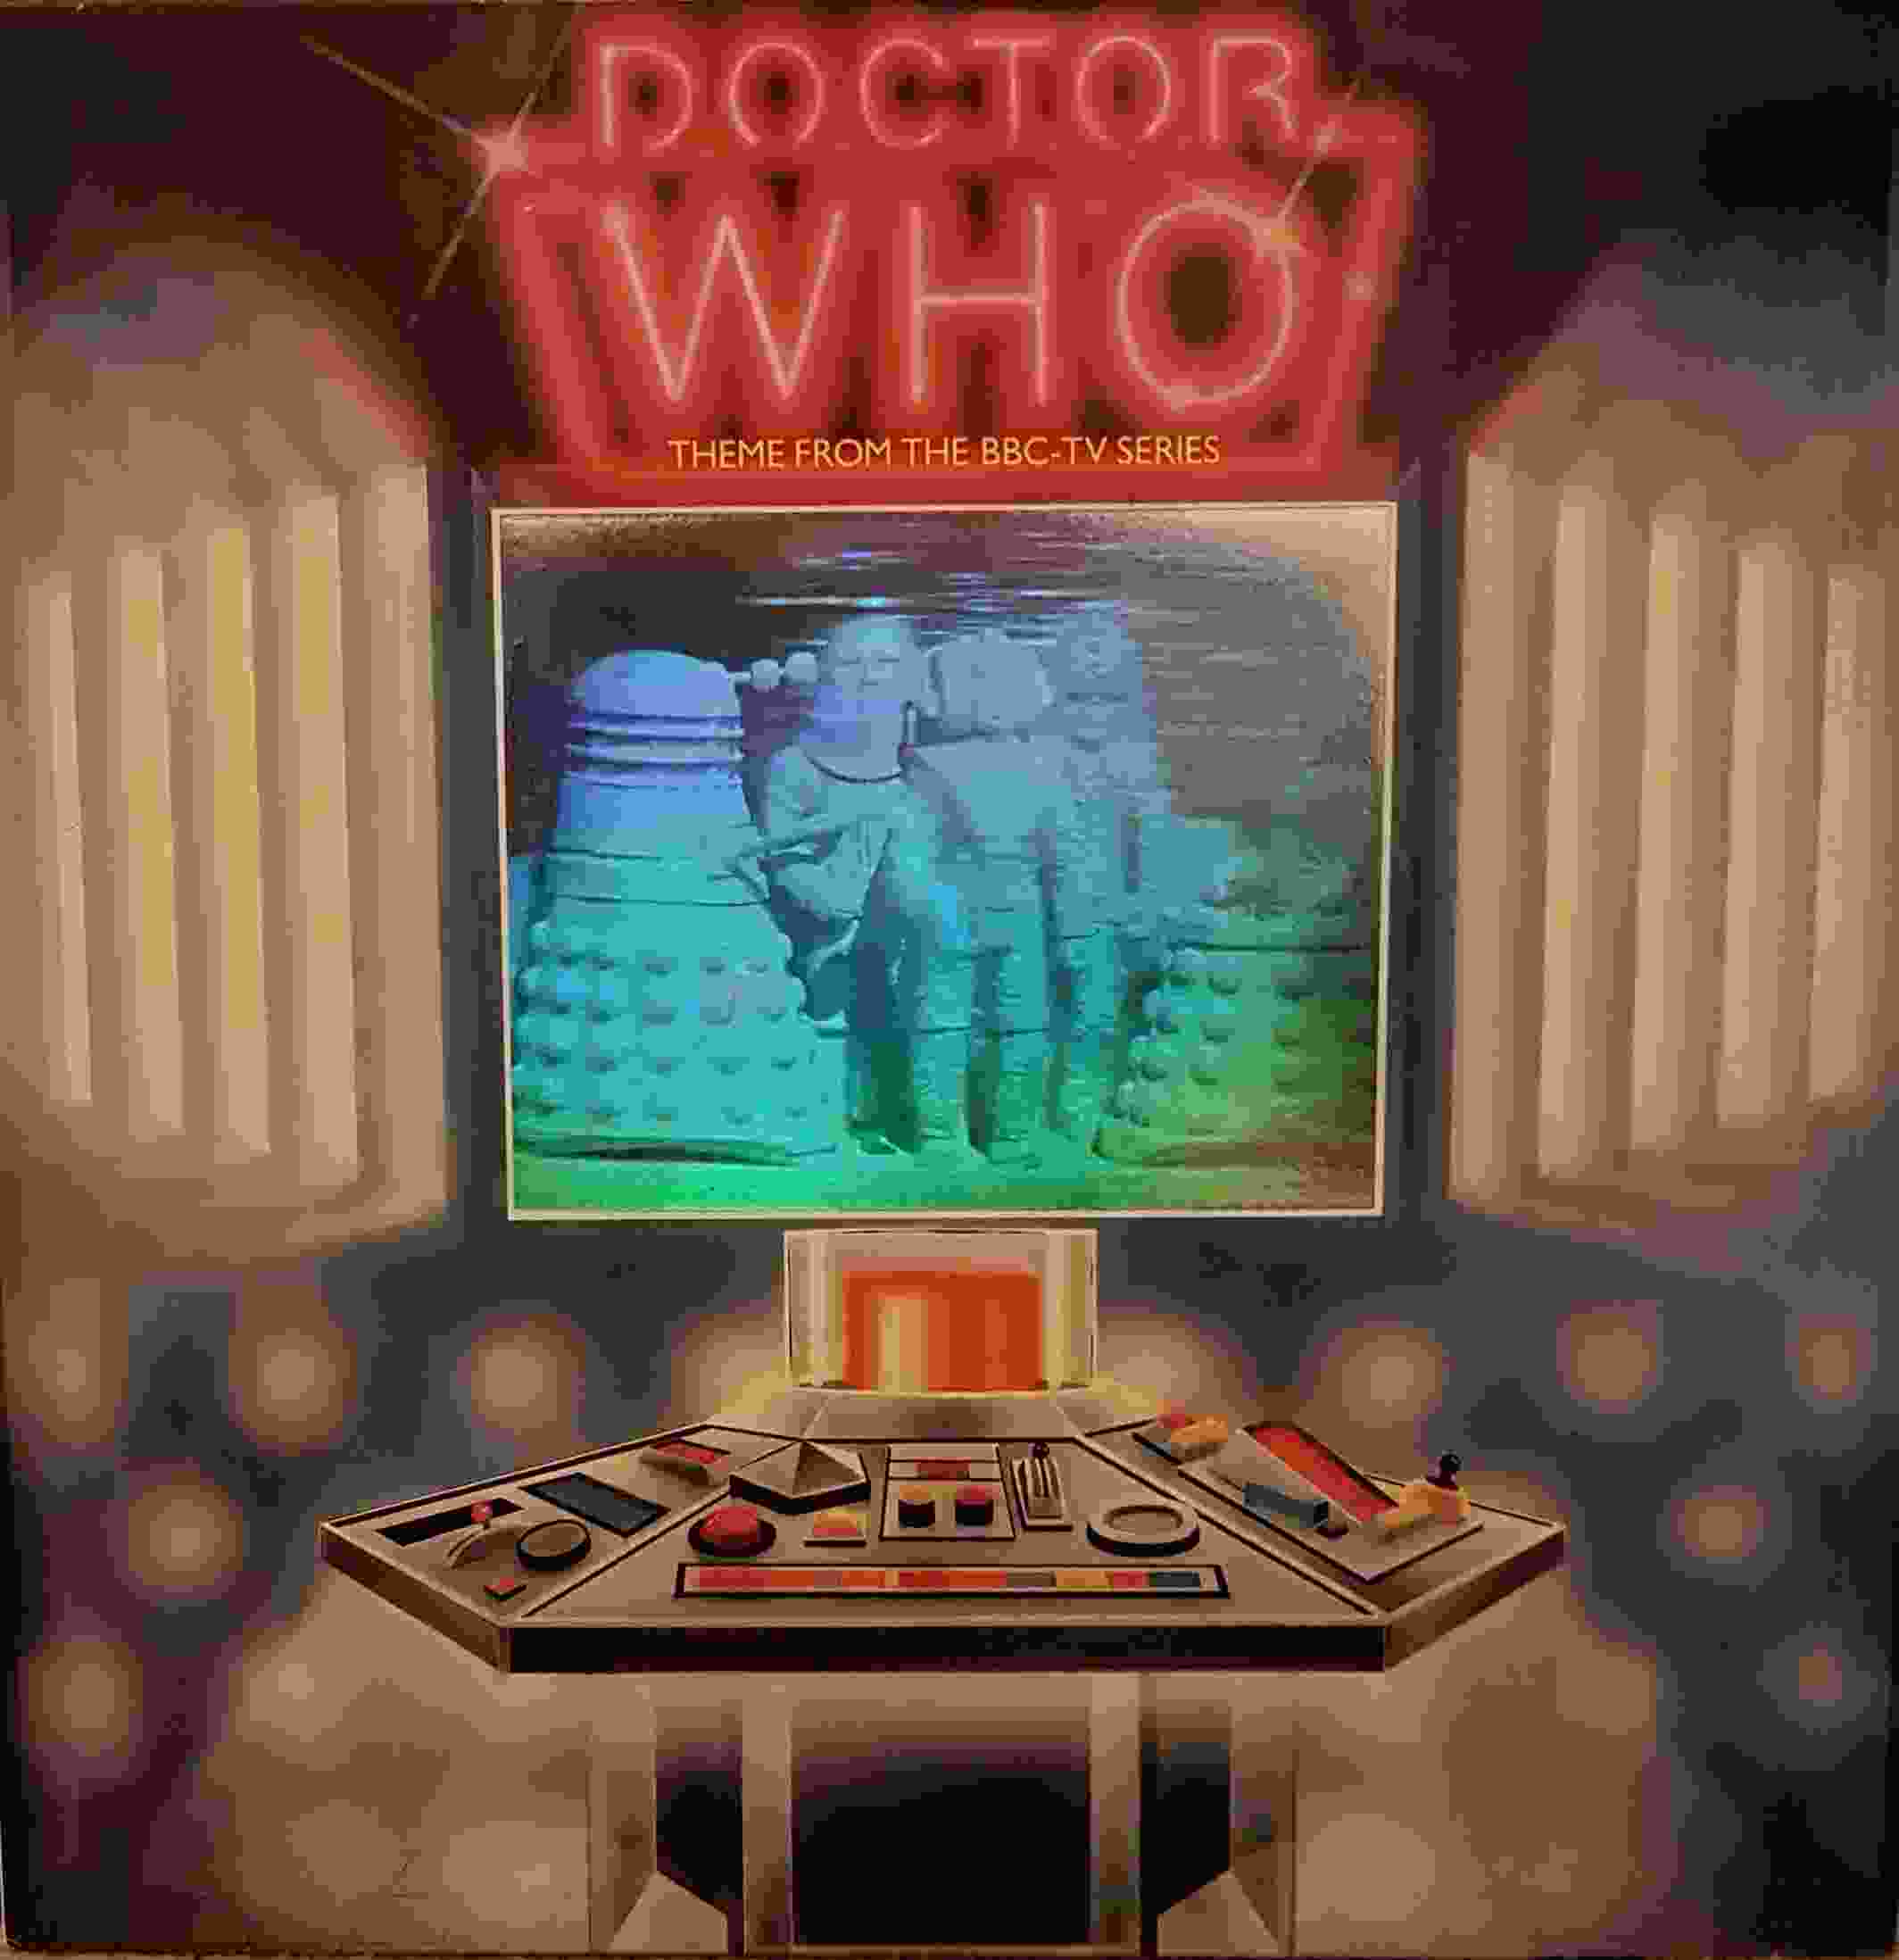 Picture of Doctor who by artist Ron Grainer / Dominic Glynn / Mankind from the BBC cassingles - Records and Tapes library